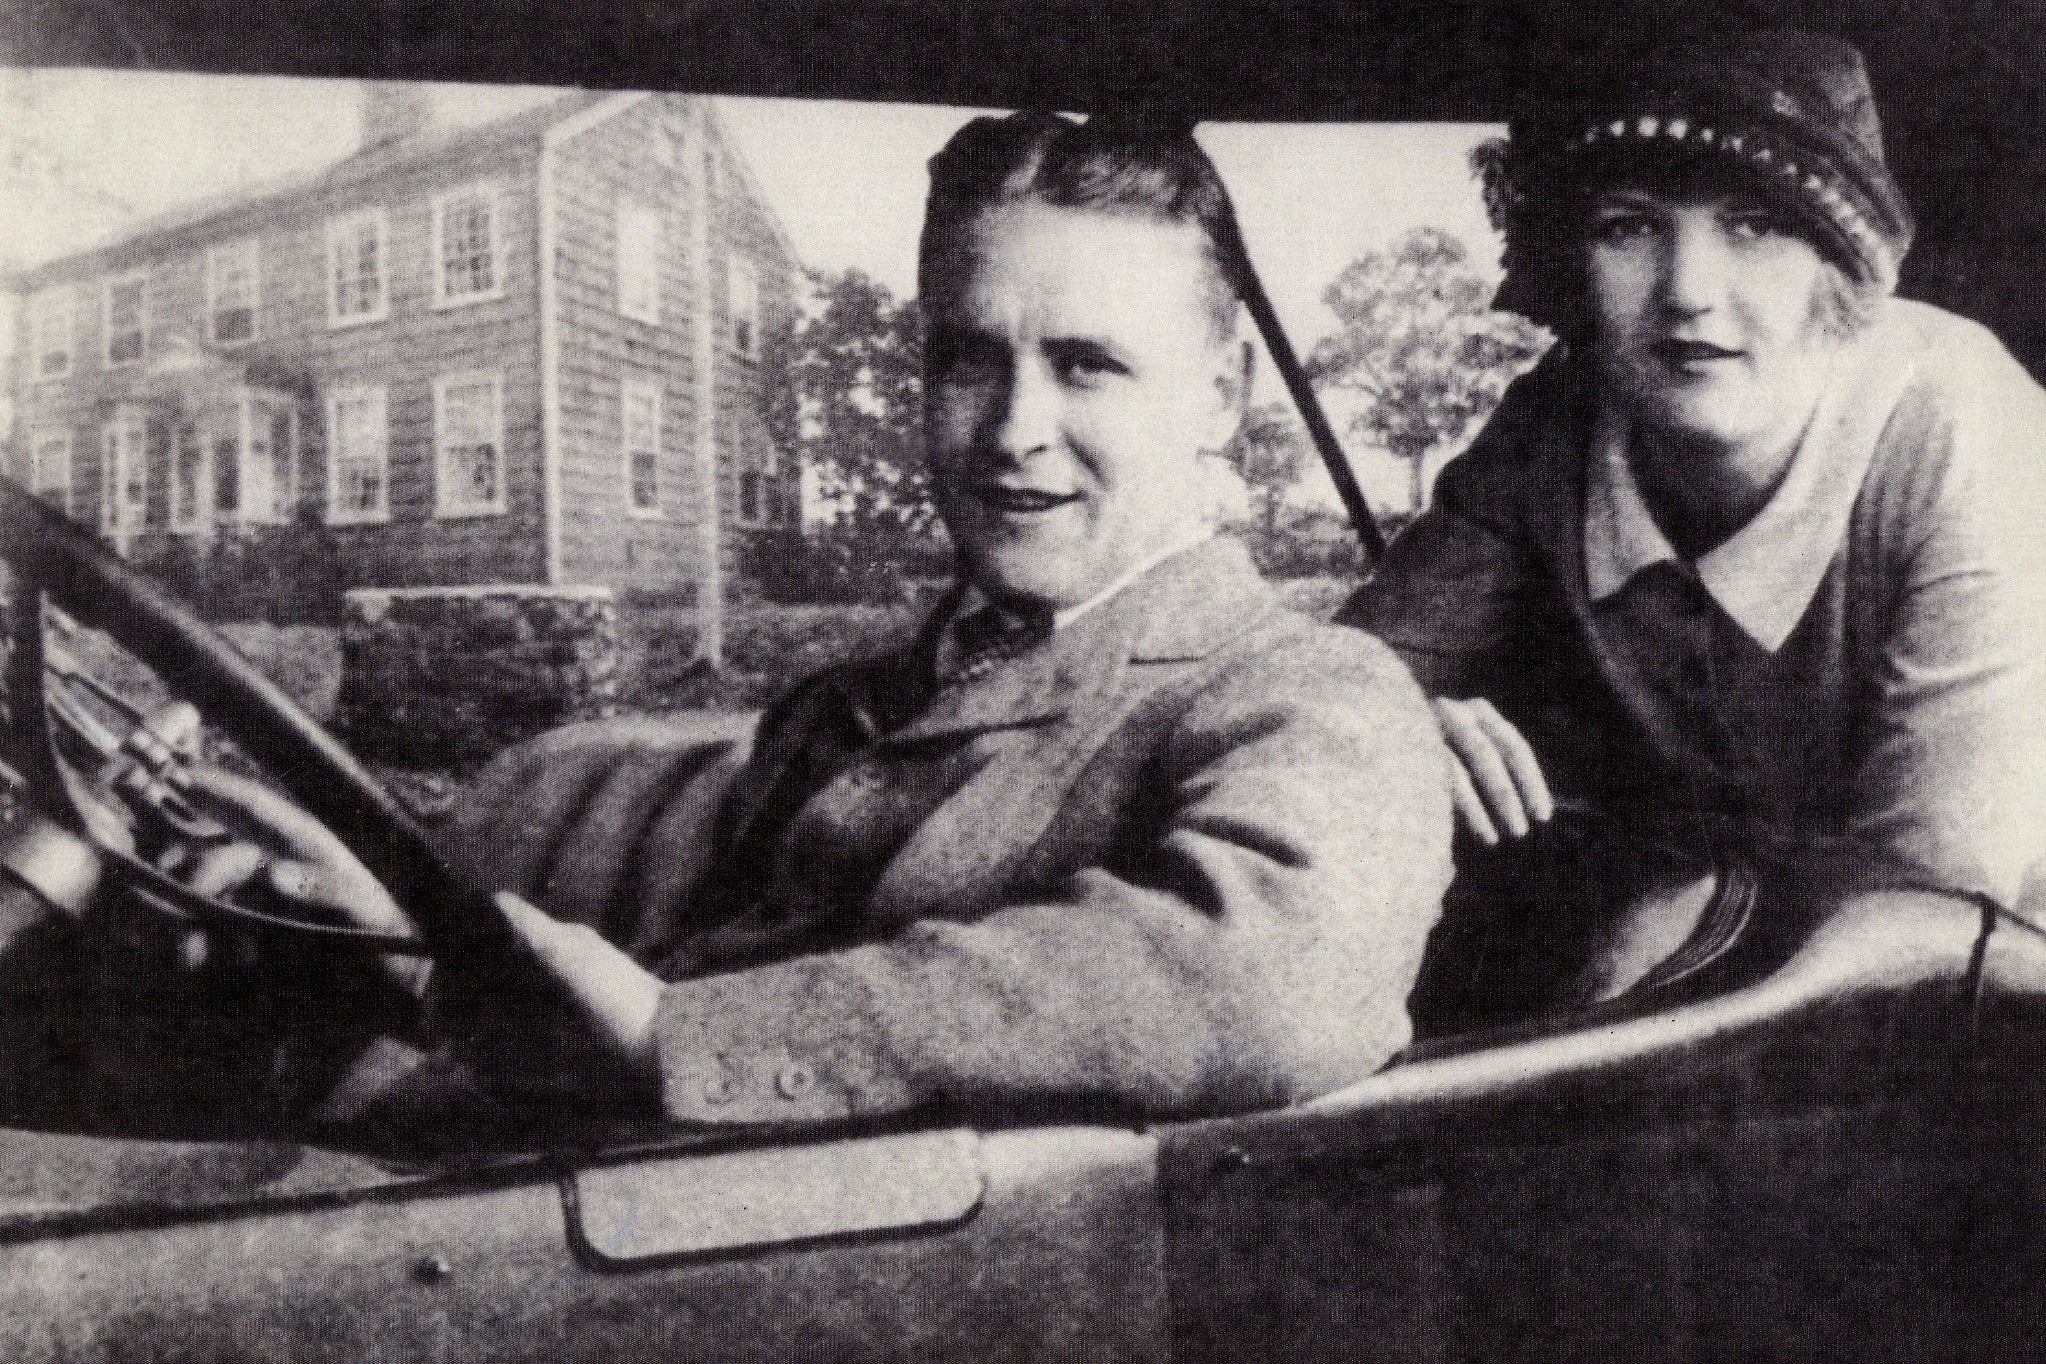 In the early 1920s, the Fitzgeralds led a decadent lifestyle they could barely afford